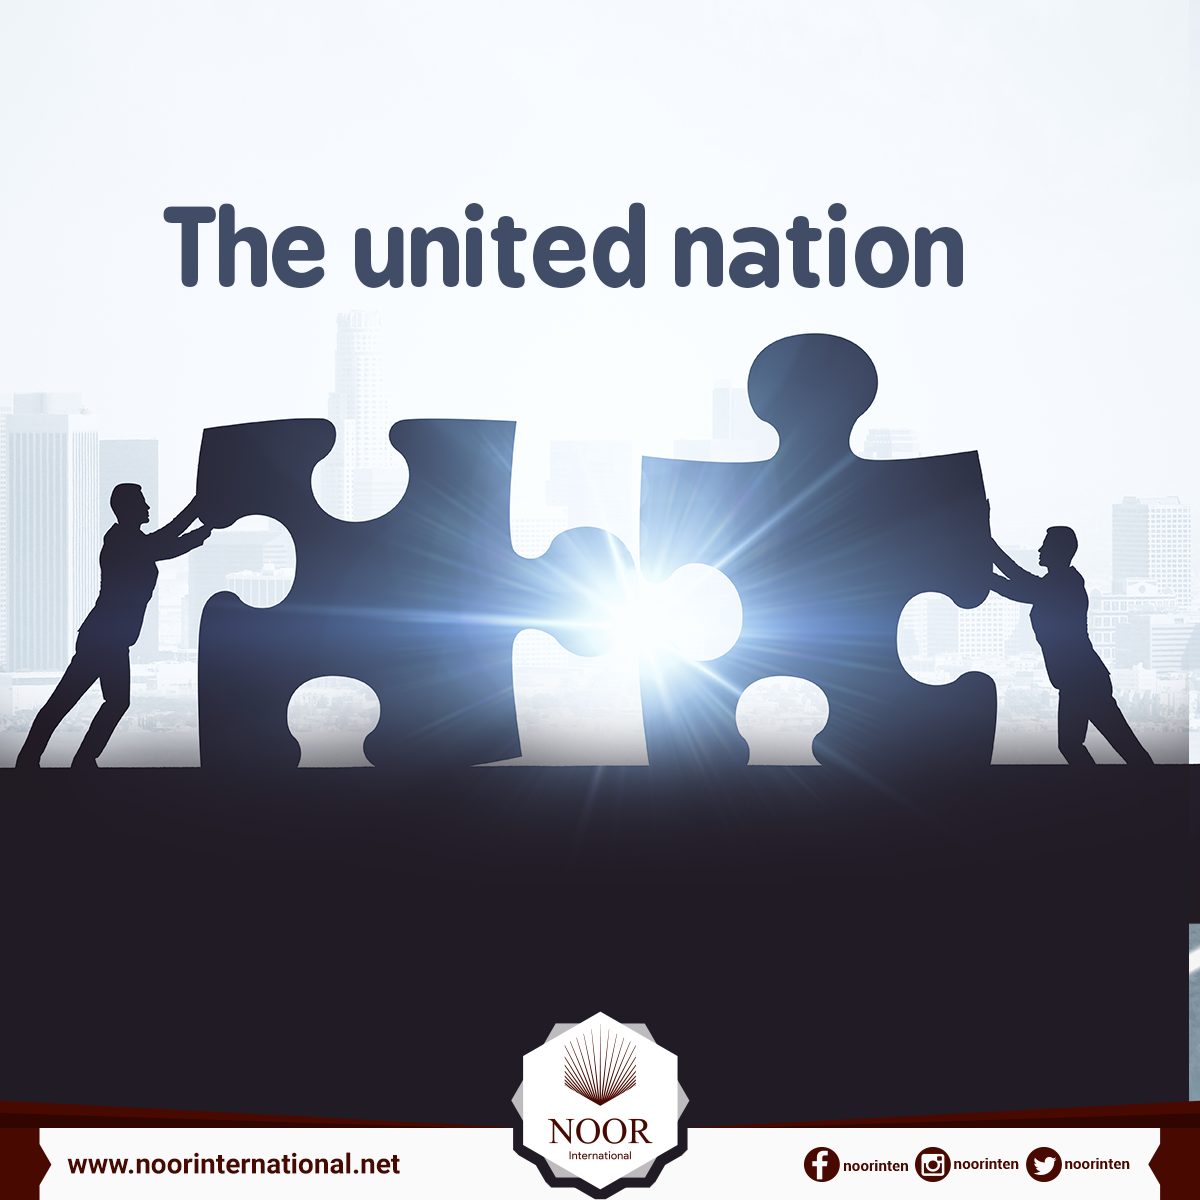 The united nation